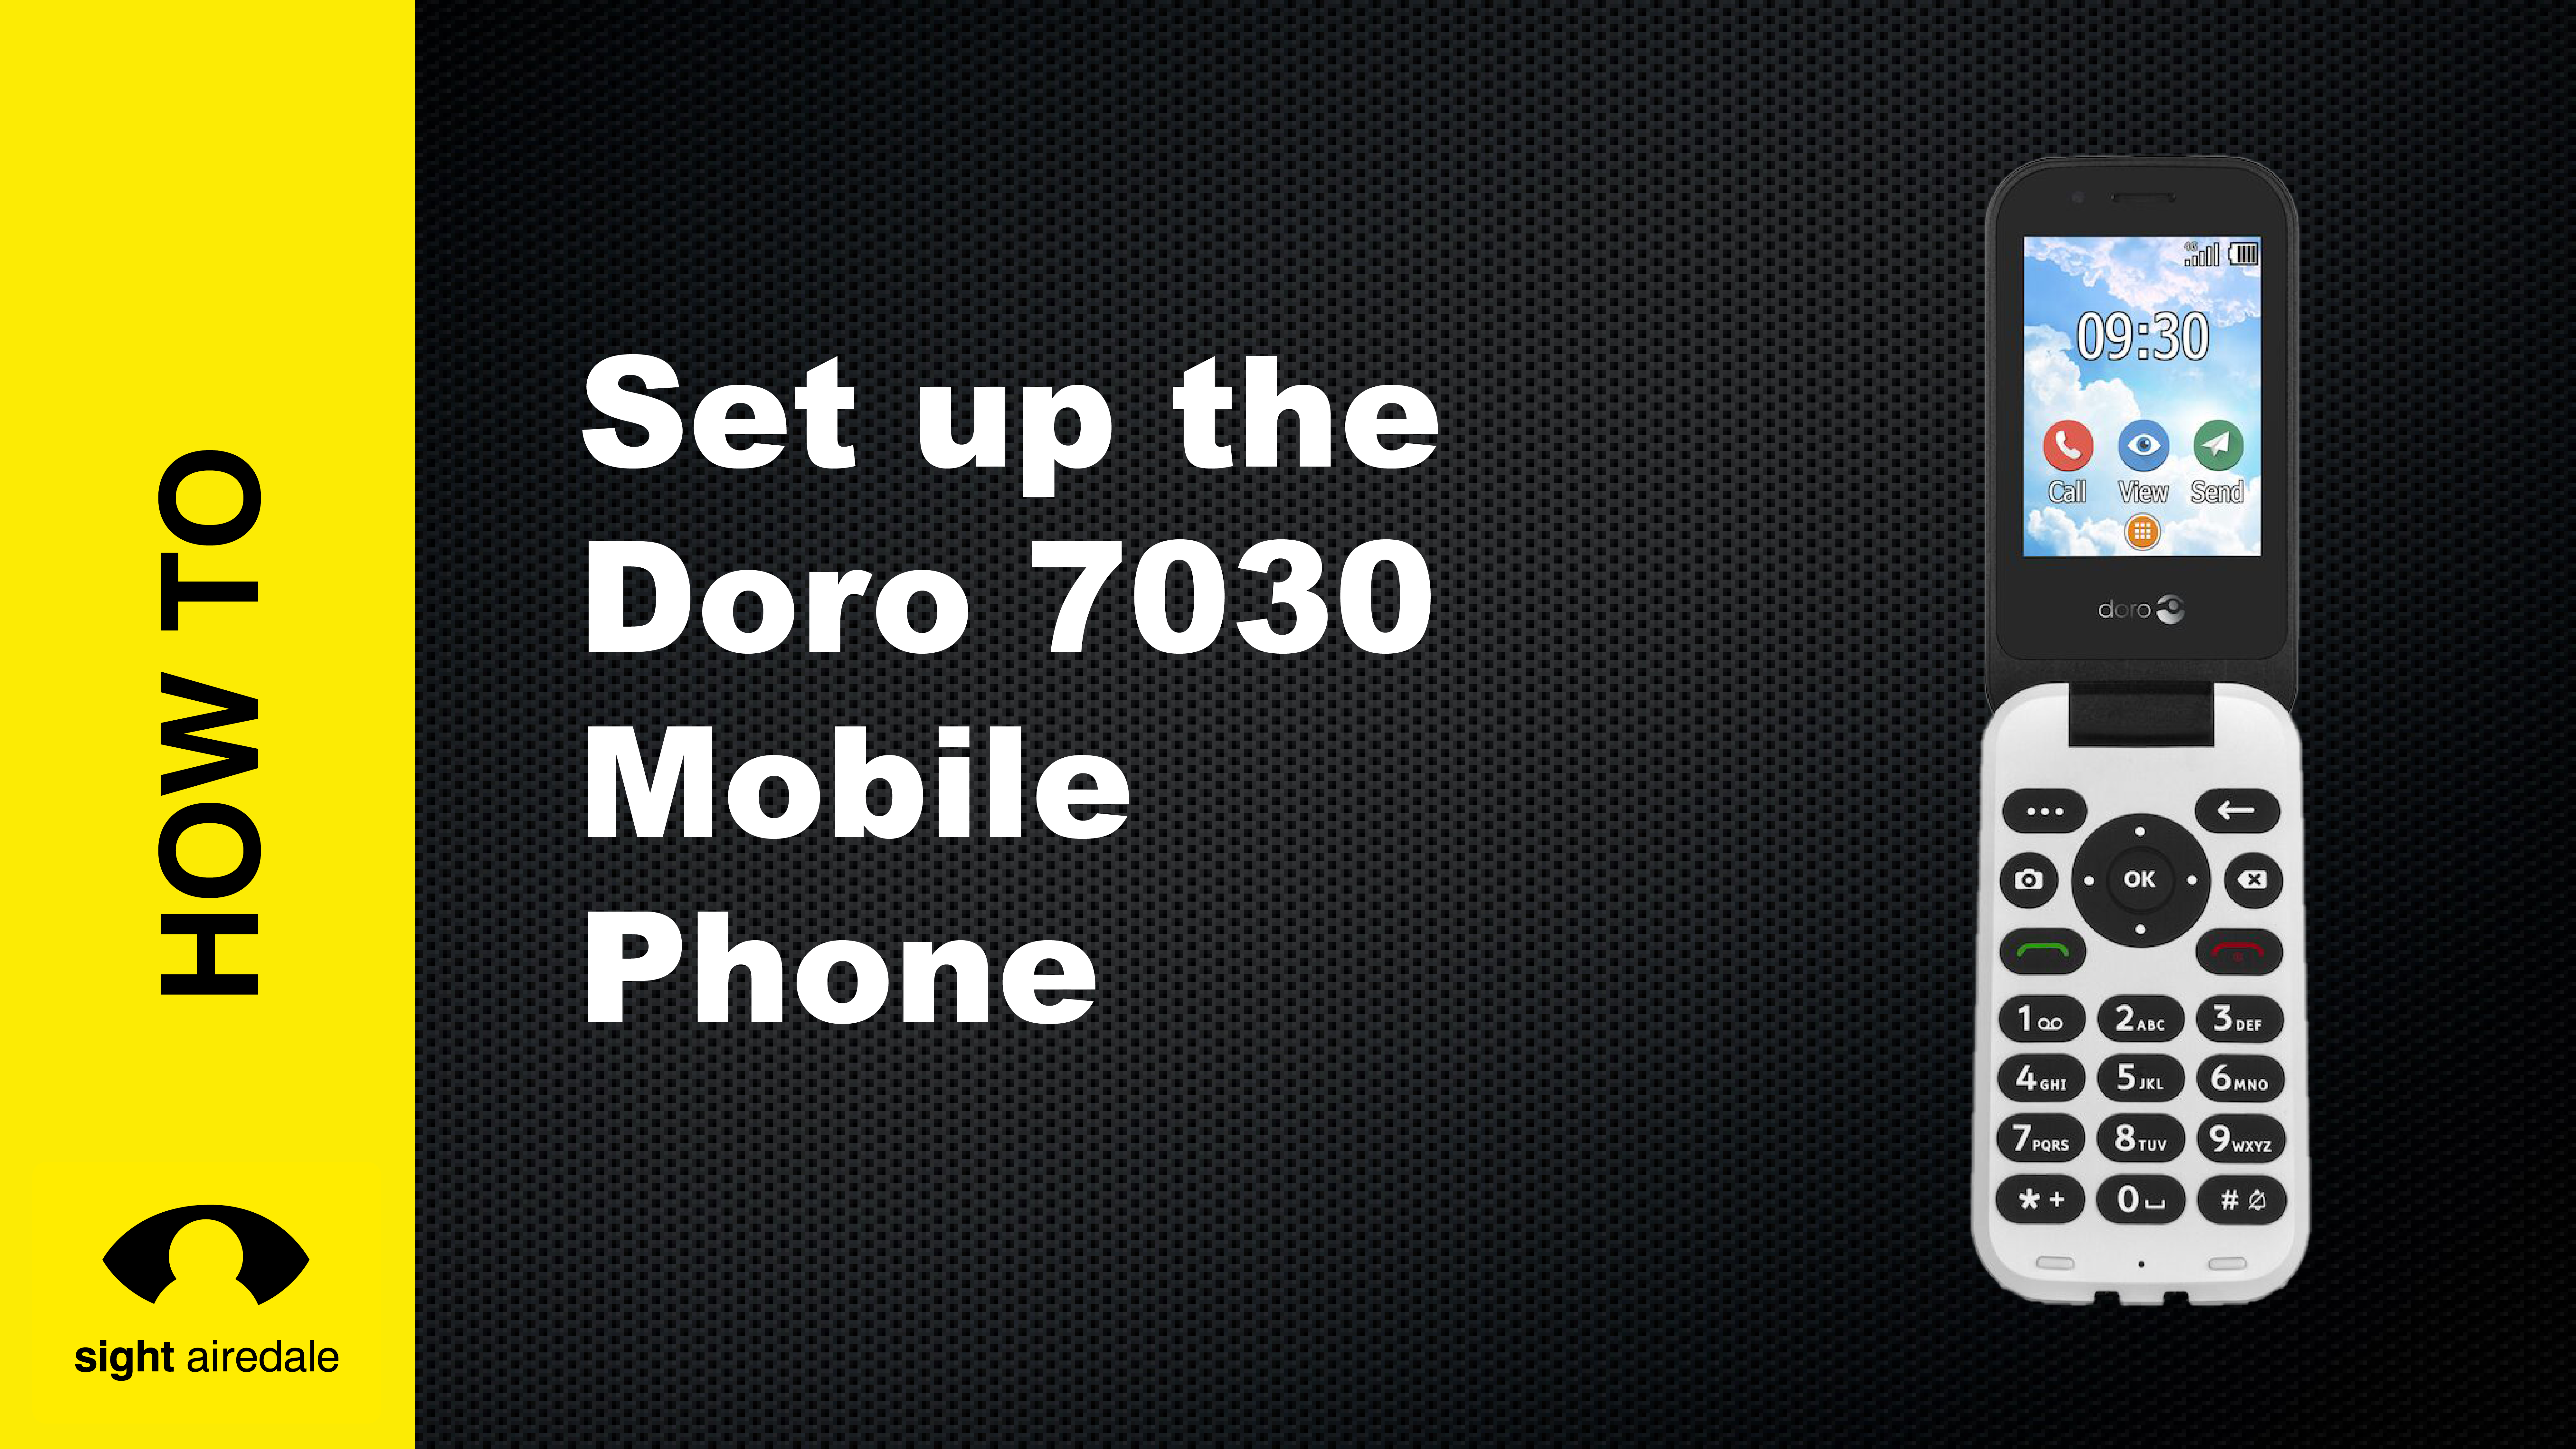 Image shows the Doro 7030 with the text how to set up the Doro 7030 Mobile Phone